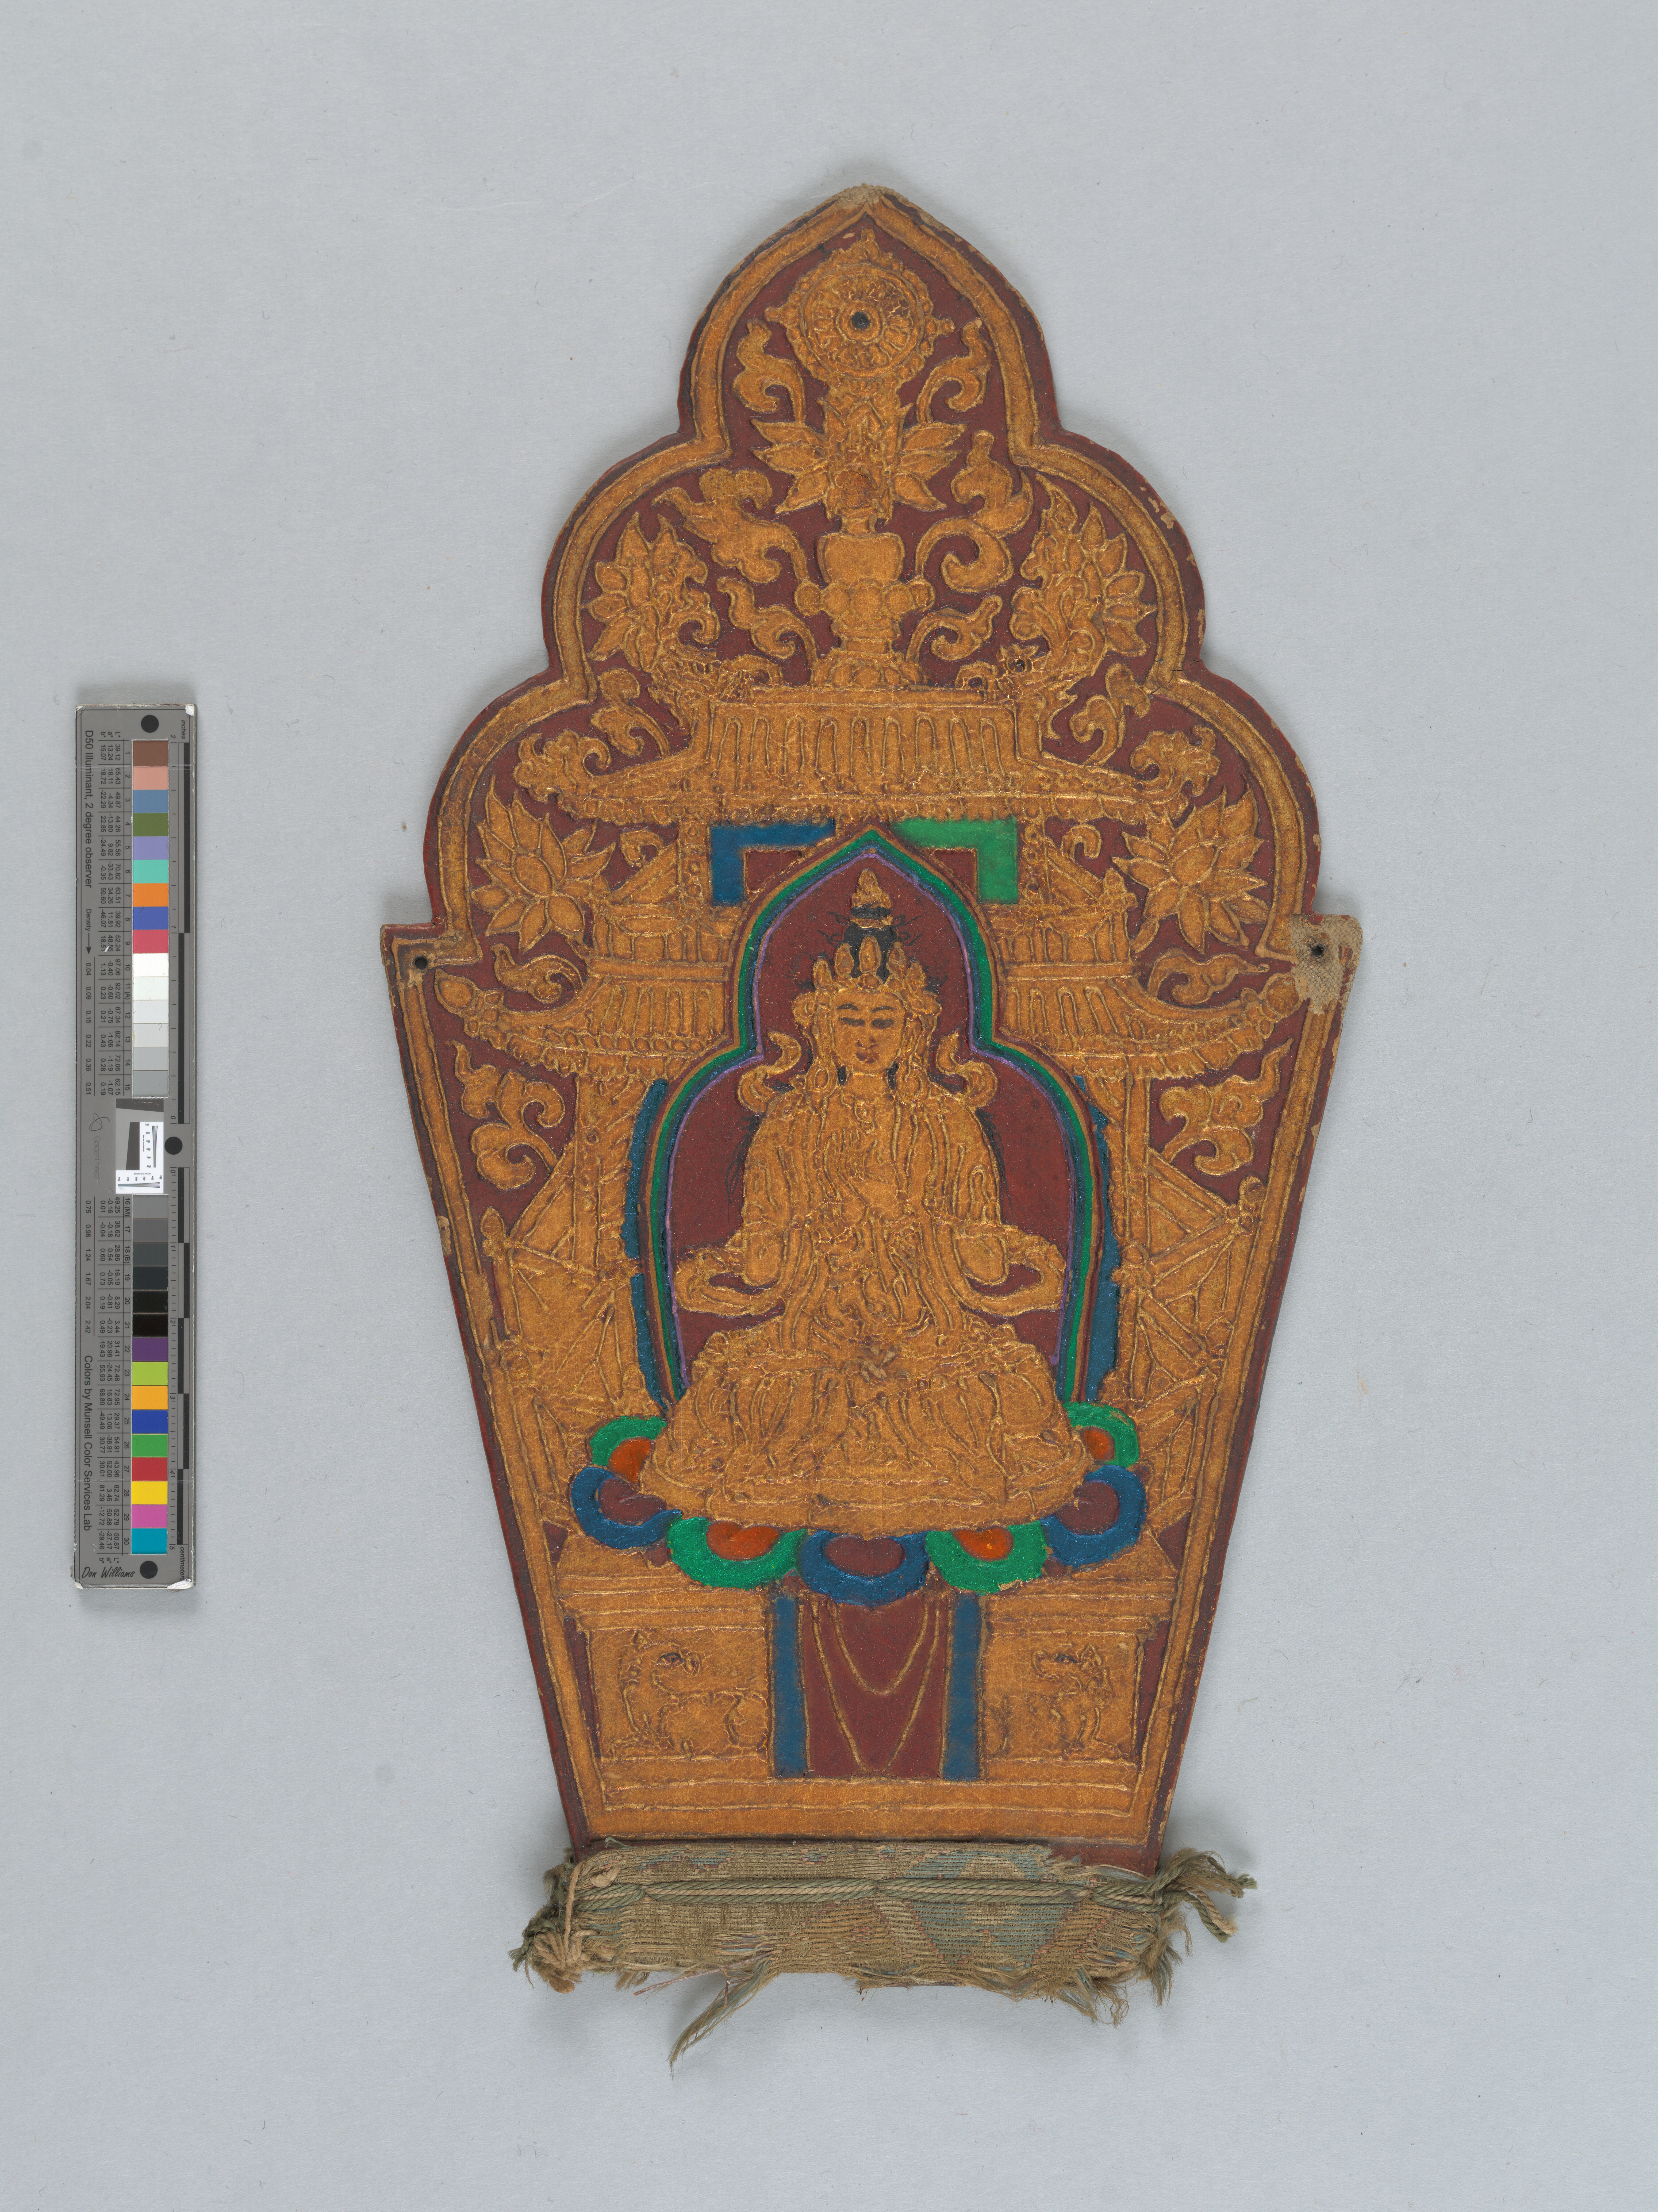 Gilded torana-shaped panel depicting a seated figure with red background and details in blue, green, orange, red, and purple.